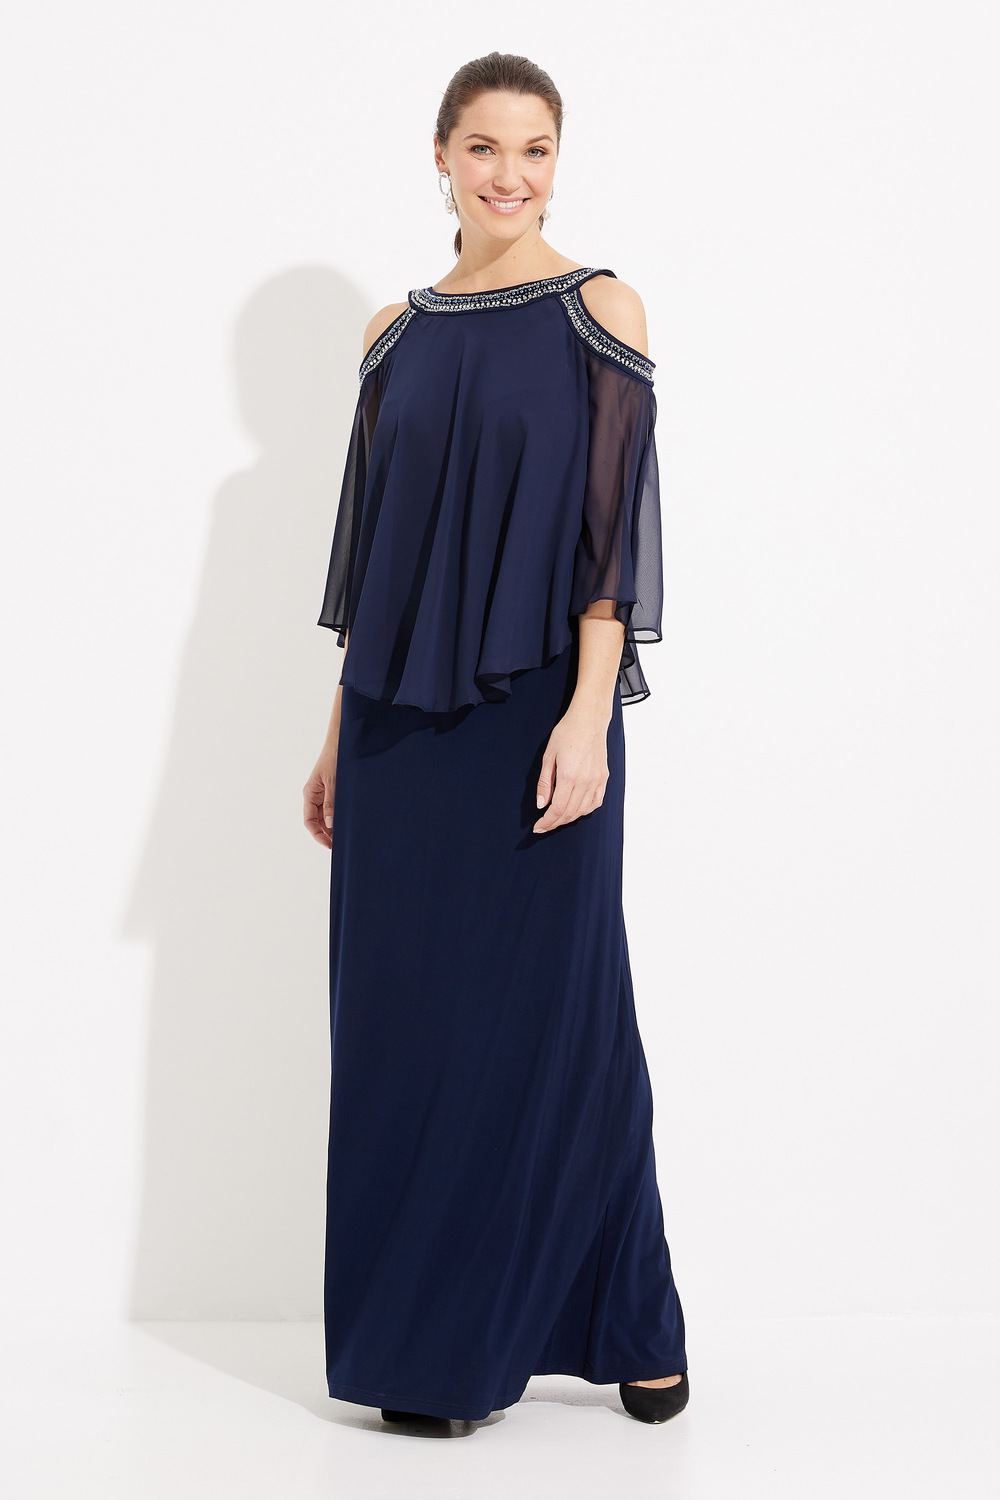 Cold Shoulder Chiffon Popover Gown Style 1351319. Navy